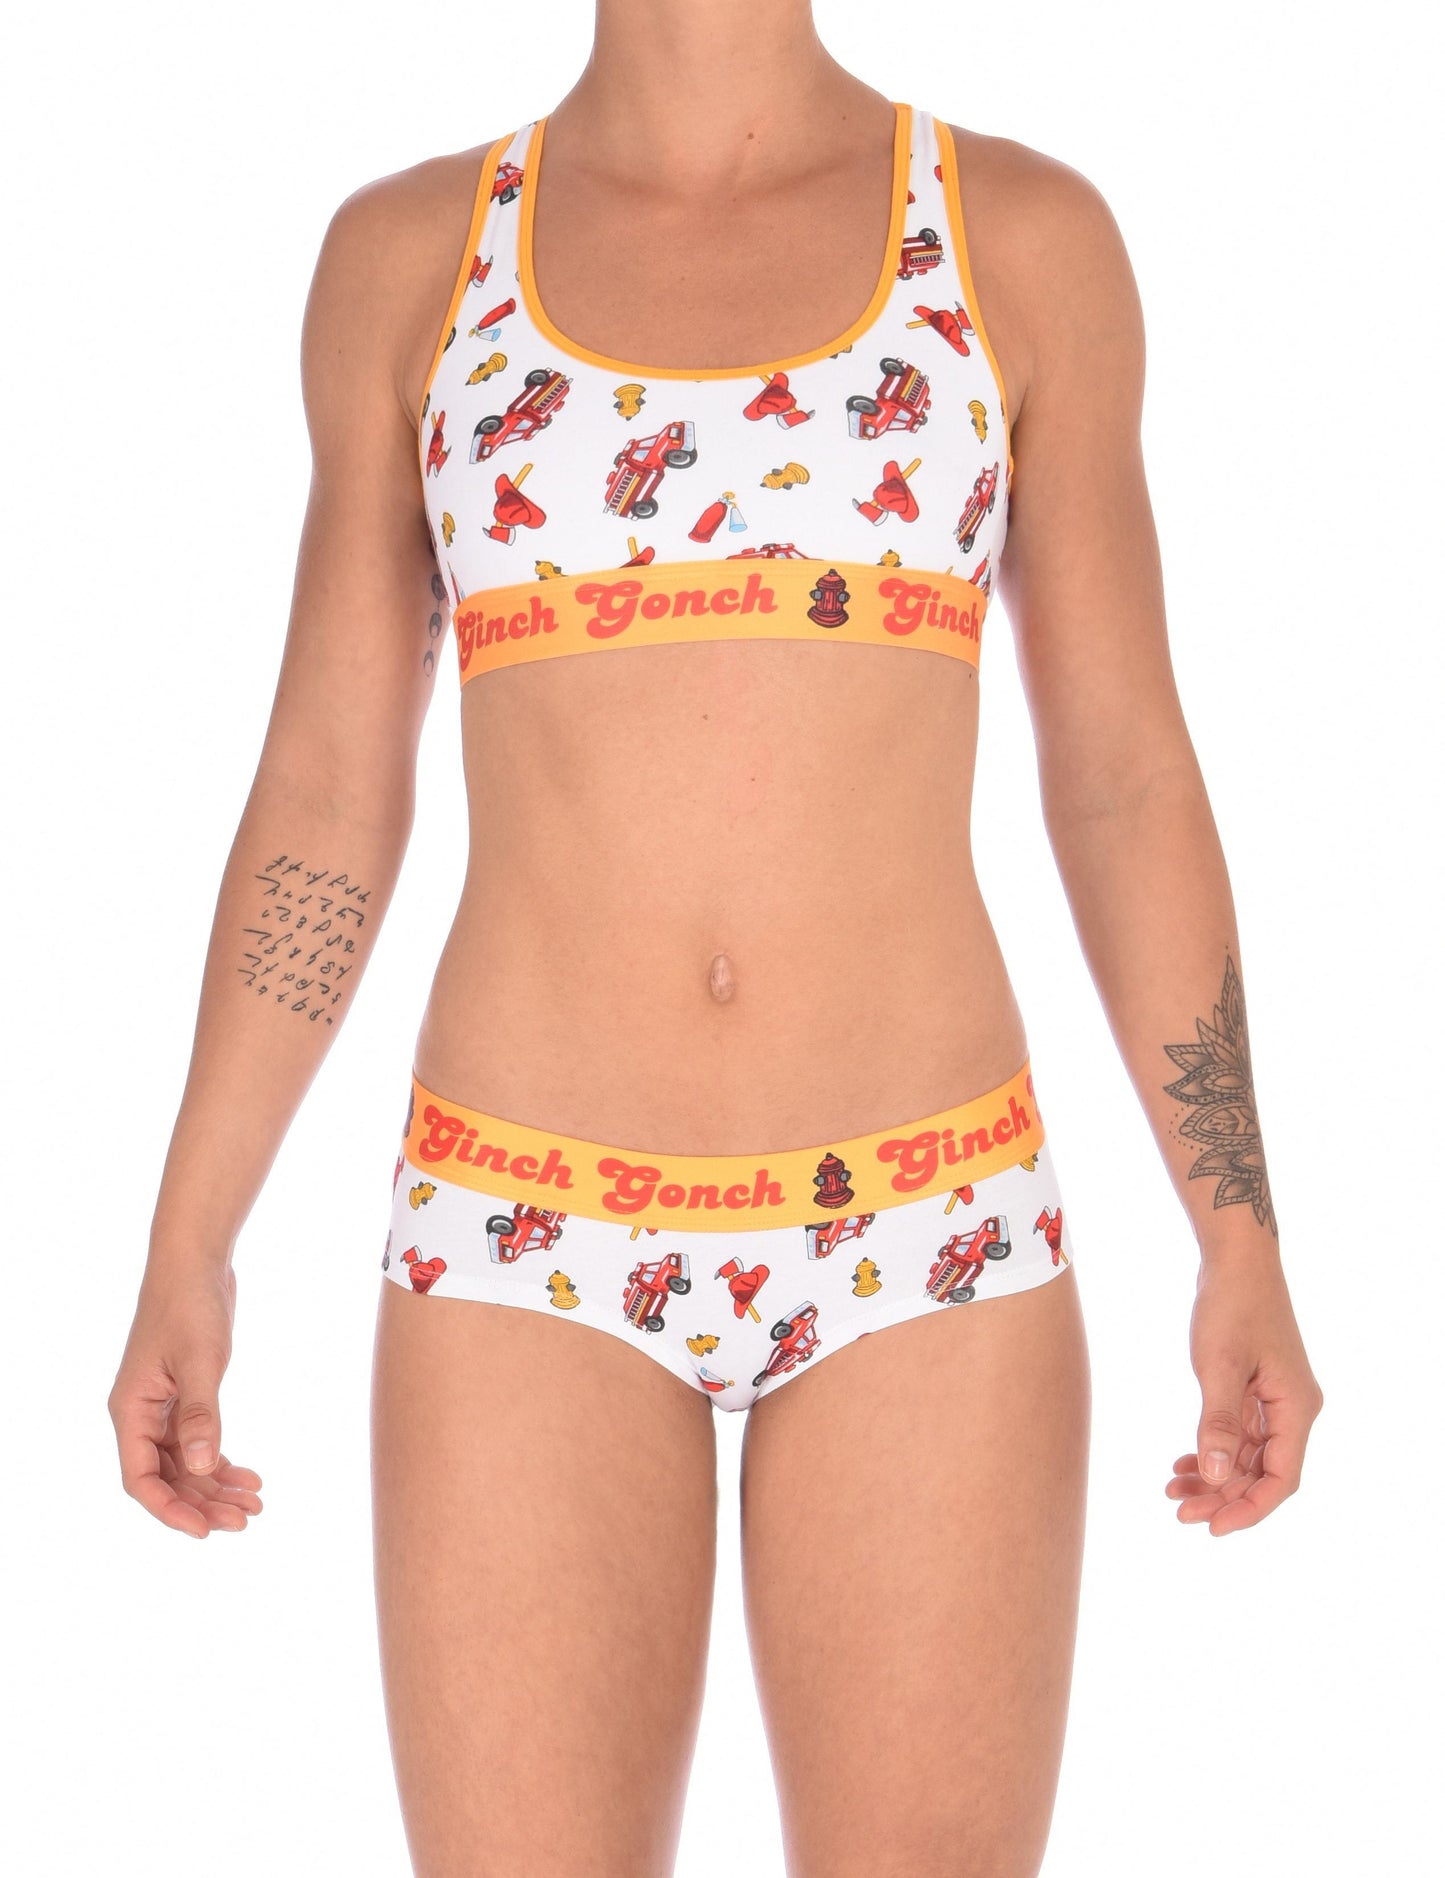 Ginch Gonch GG Fire Fighters boy cut Brief womens underwear white fabric with fire engines hats and hydrants, yellow trim and yellow printed waistband front shown with matching sports bra